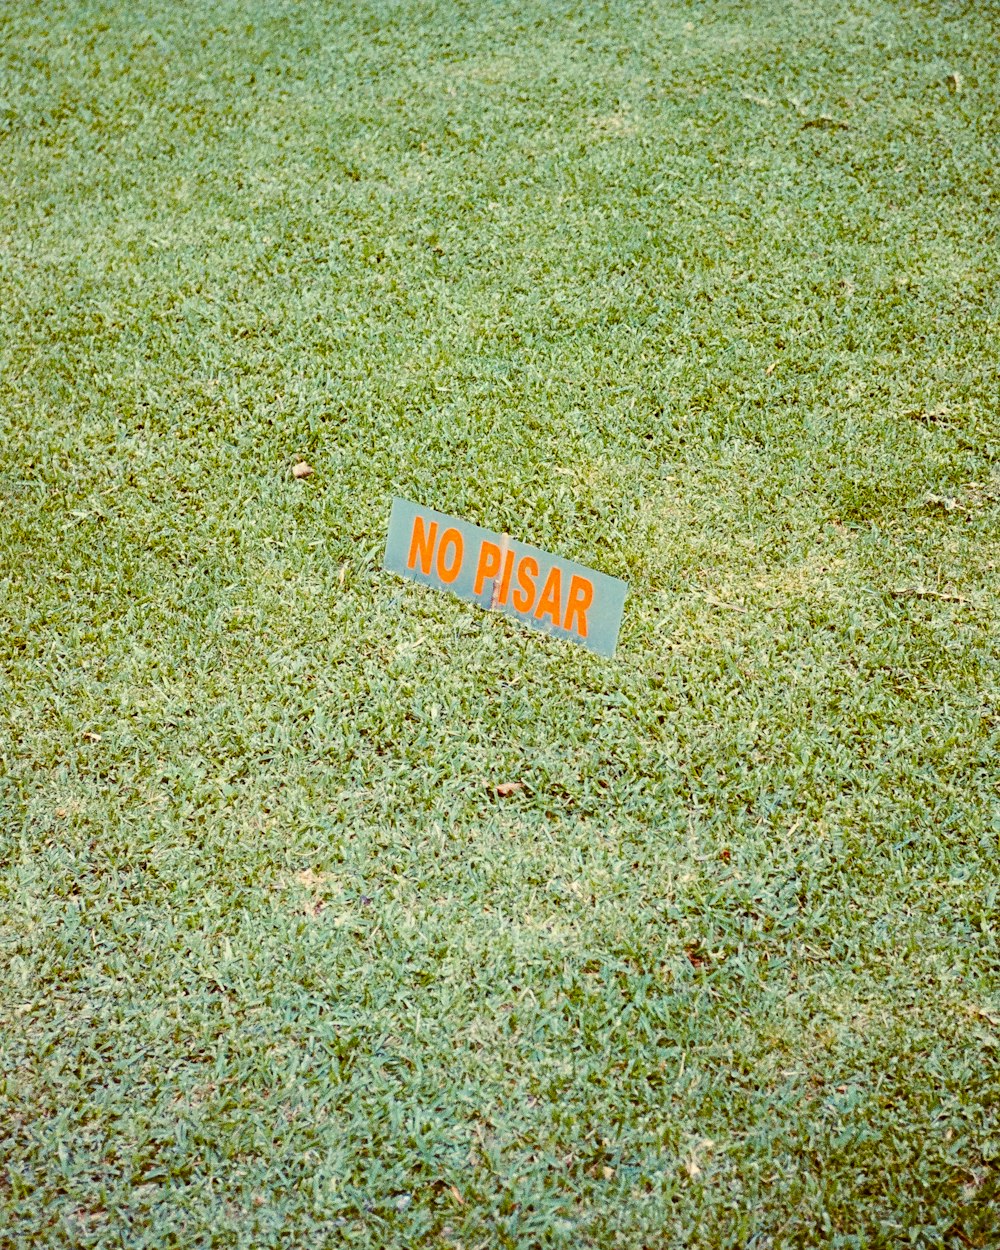 a sign that is sitting in the grass